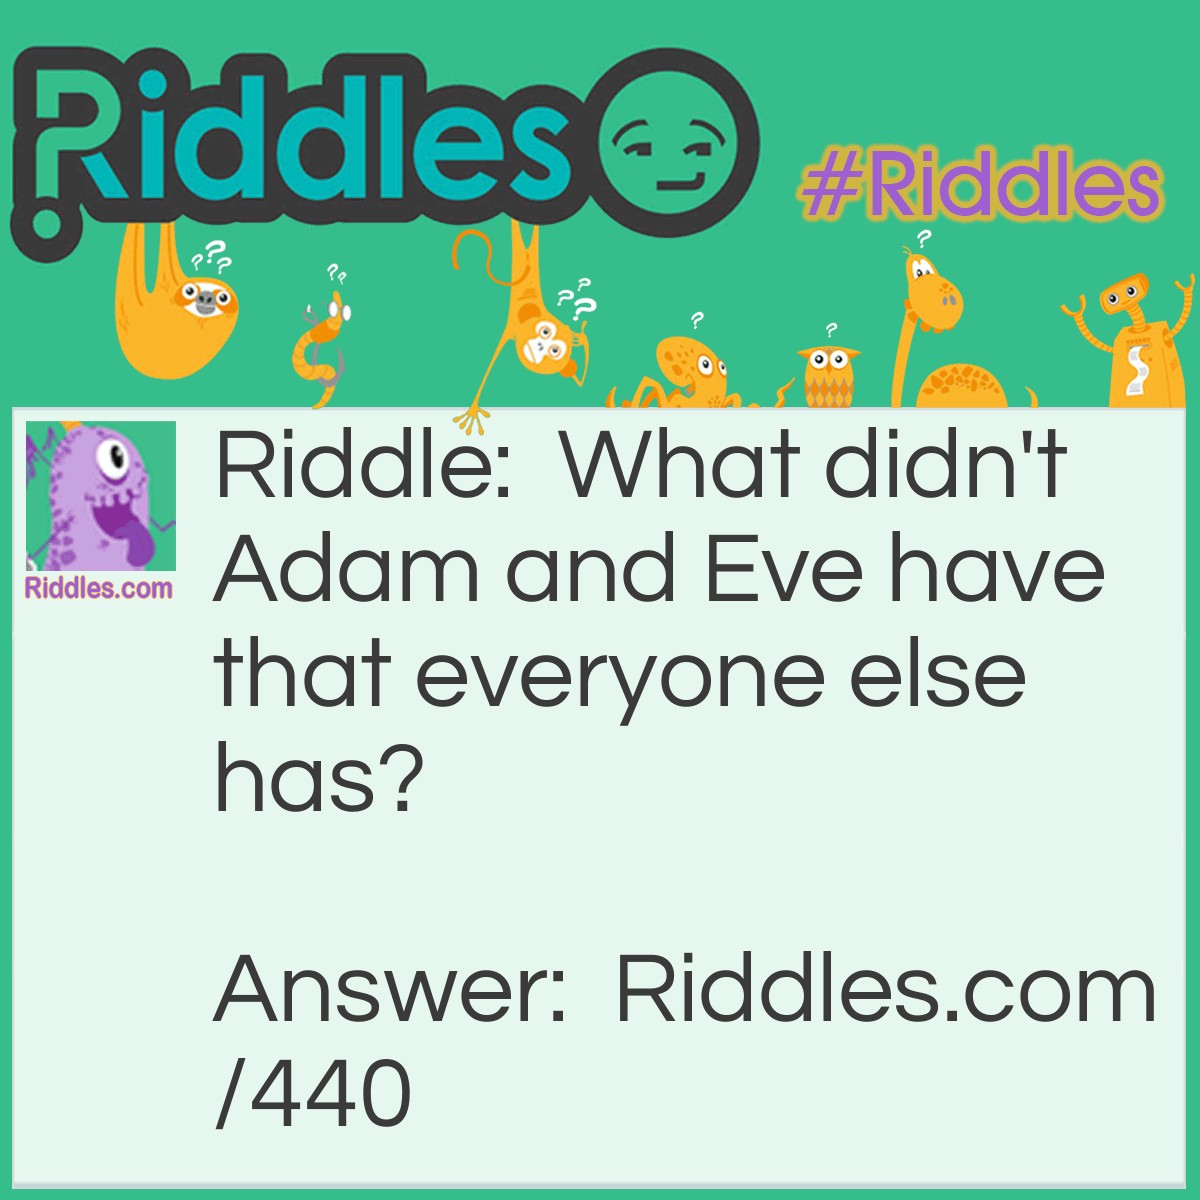 Riddle: What didn't Adam and Eve have that everyone else has? Answer: Parents.